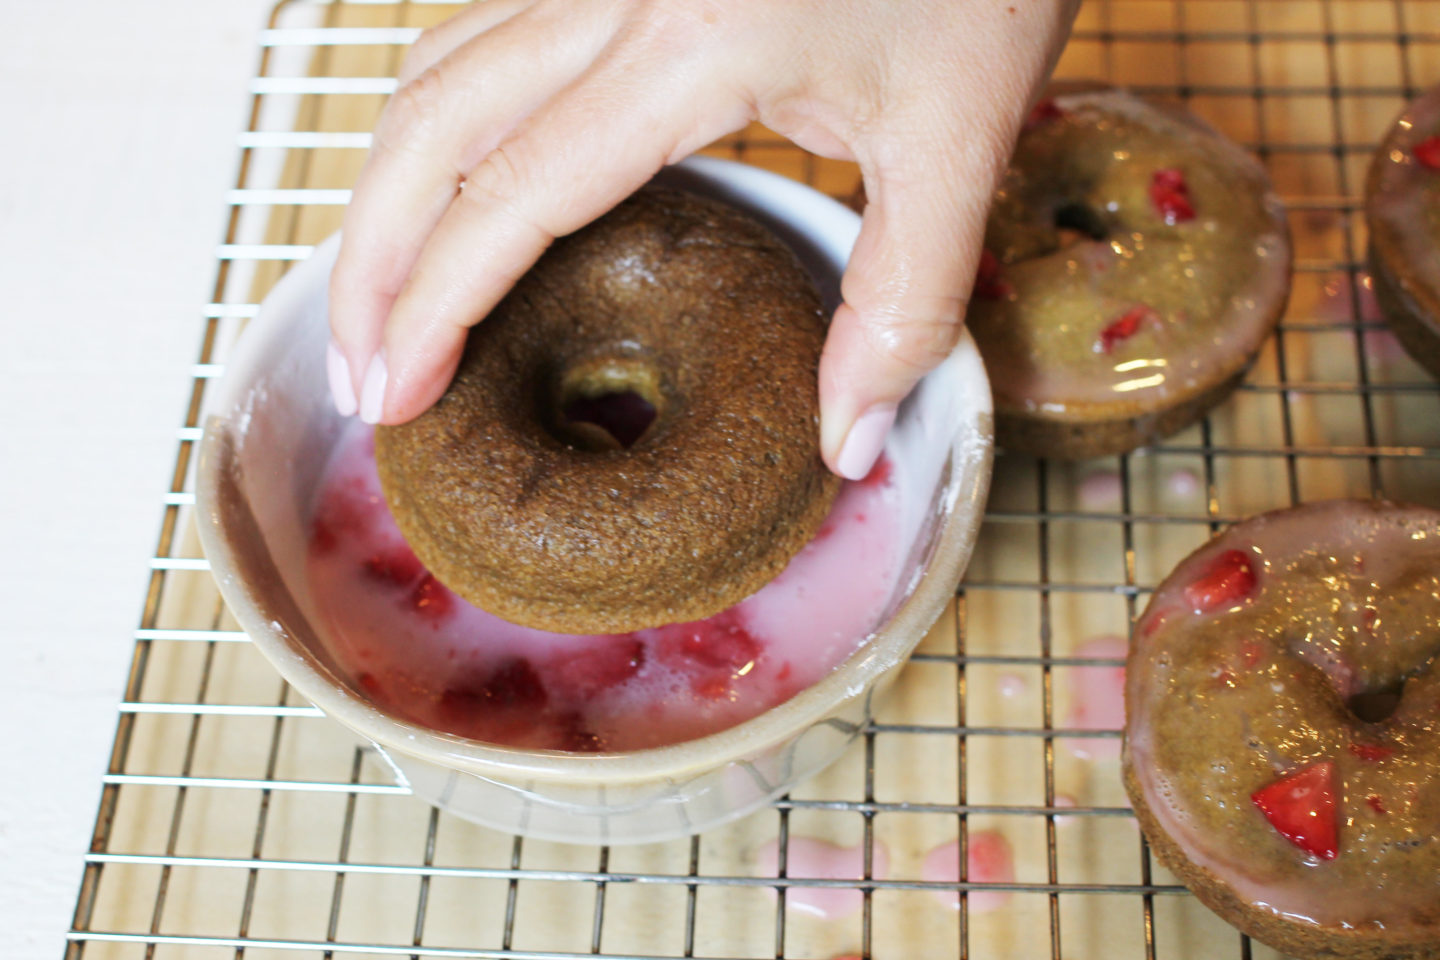 Dipping Donut in the Fresh Strawberry Glaze